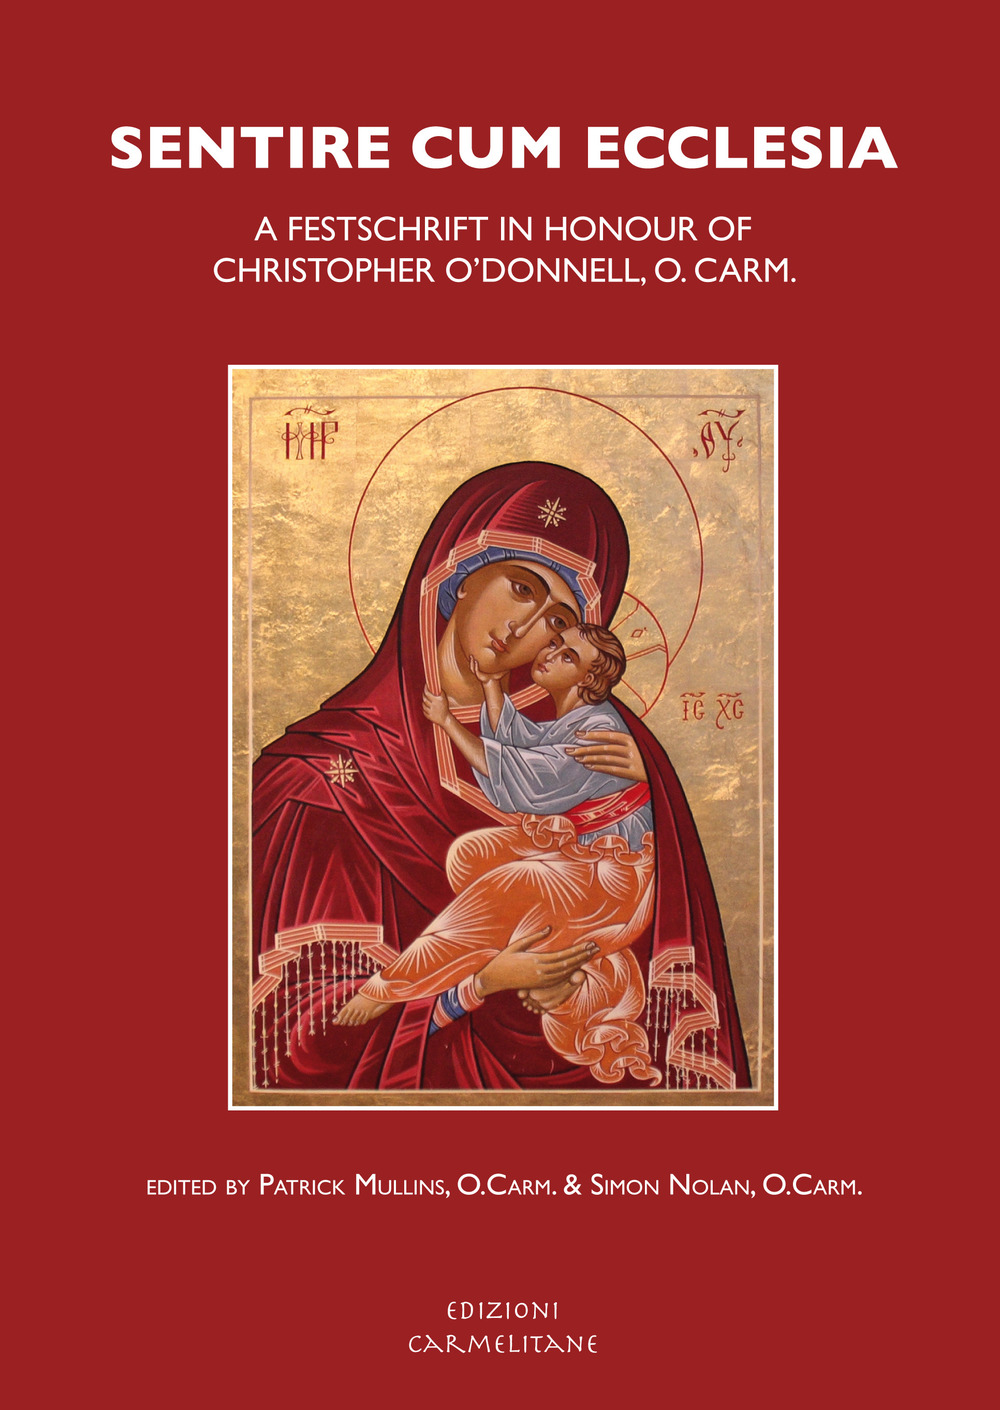 Sentire cum ecclesia. A Festschrift in honour of Christopher O'Donnell, O.Carm.